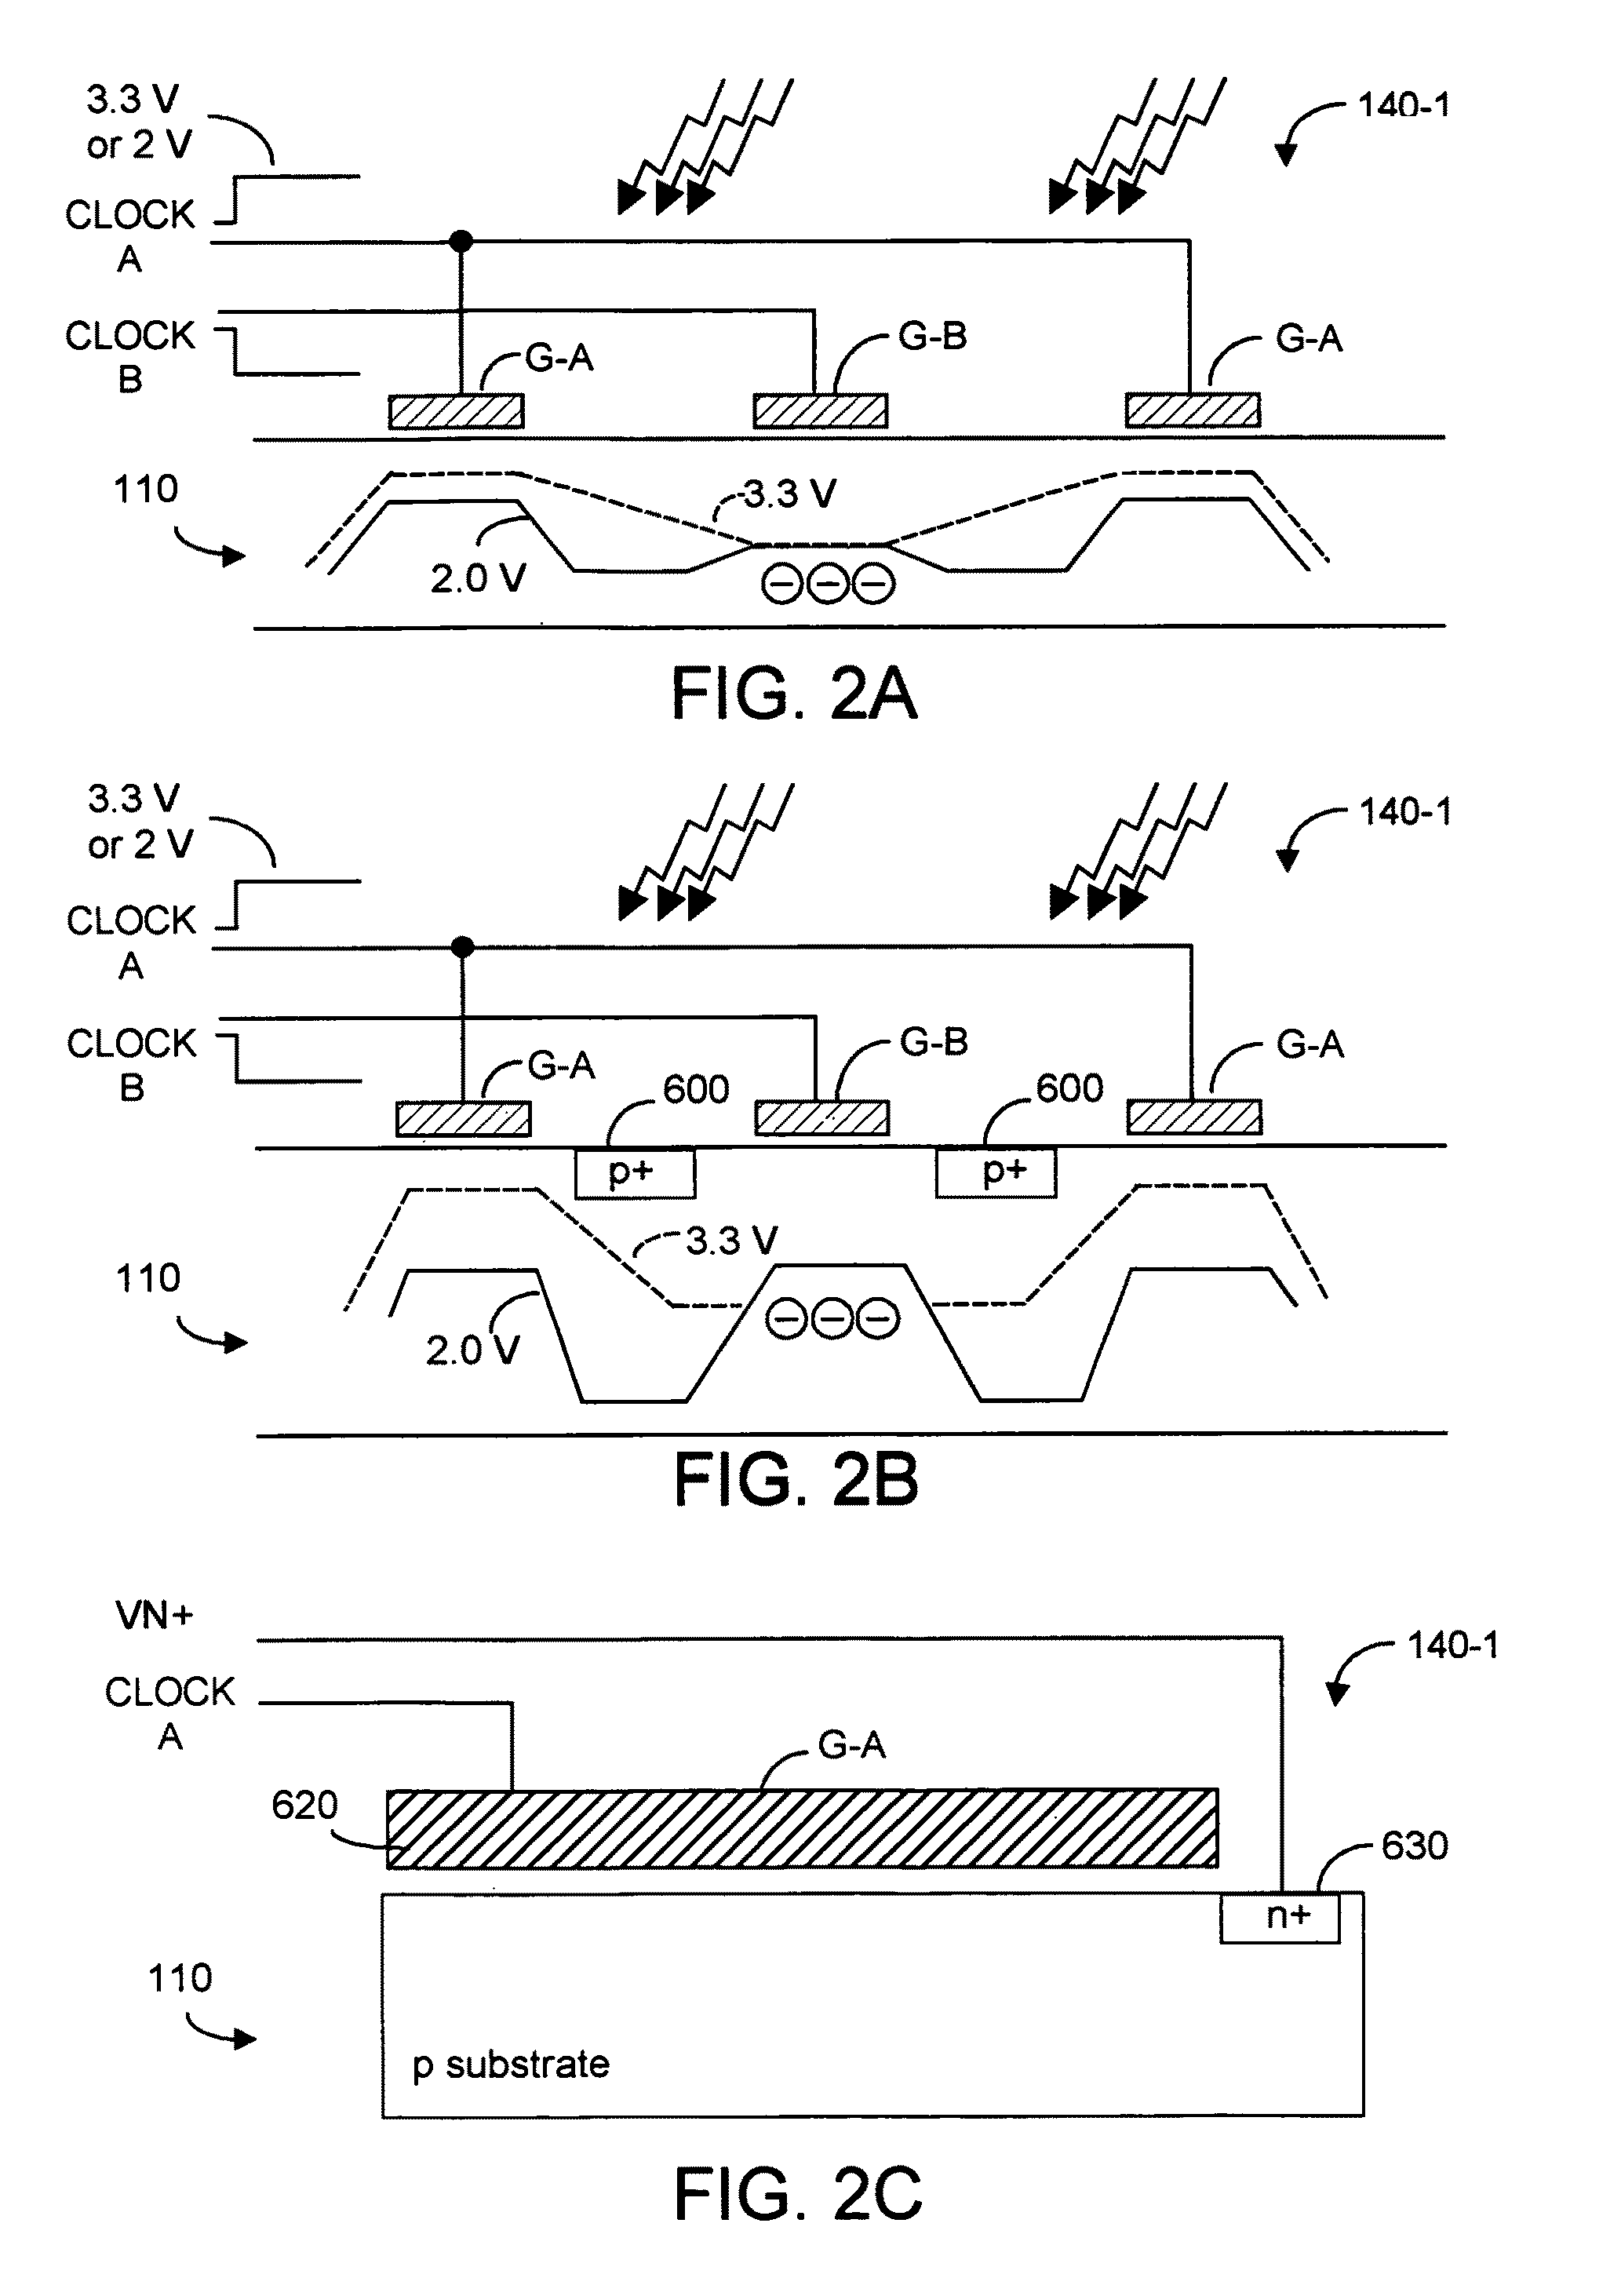 CMOS three-dimensional image sensor detectors with assured non collection of late arriving charge, more rapid collection of other charge, and with improved modulation contrast